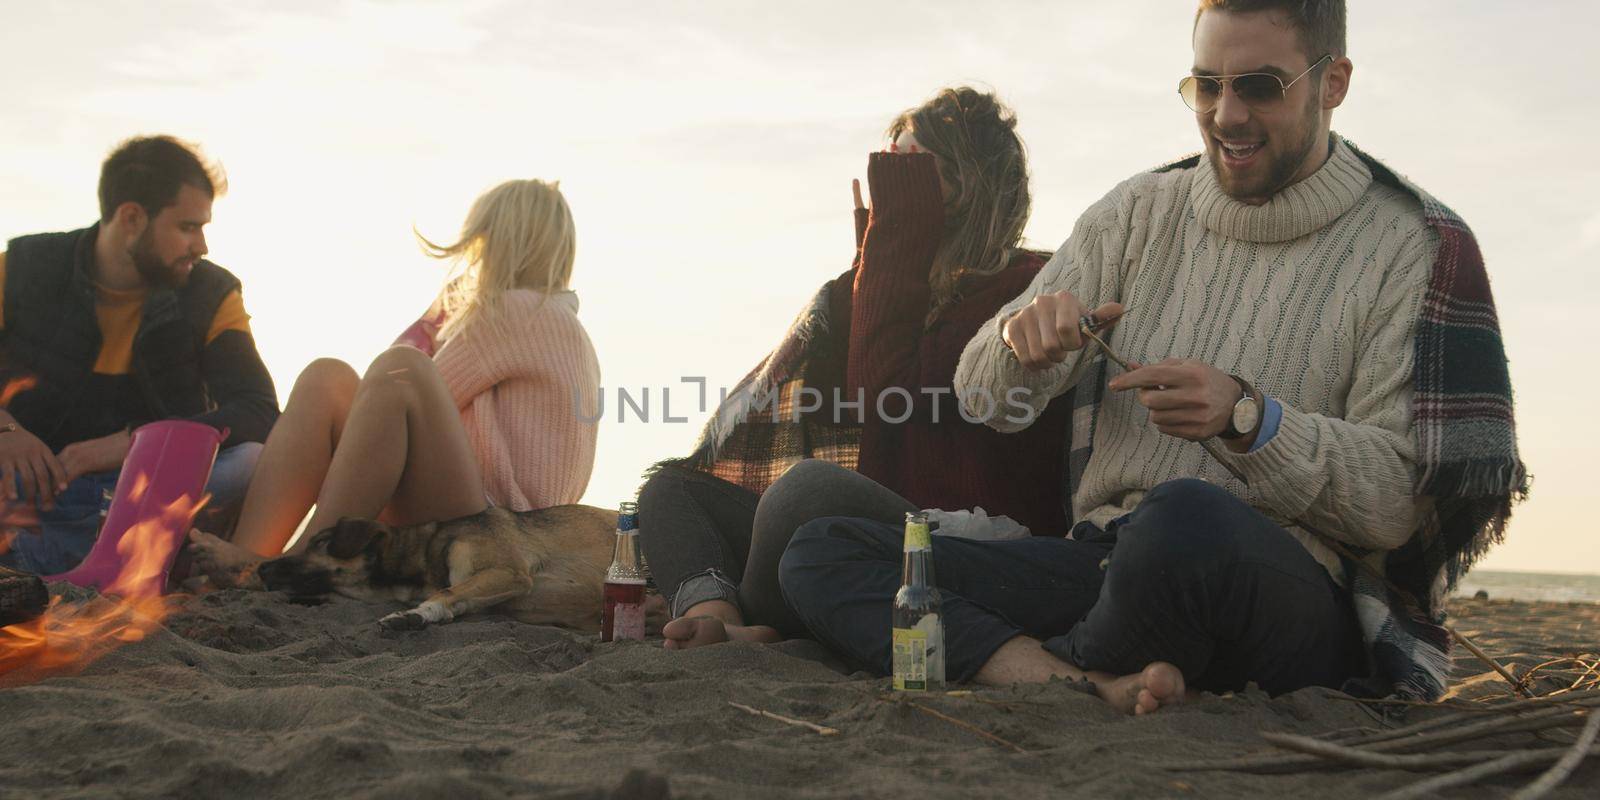 Group of friends with dog relaxing around bonfire on the beach at sunset